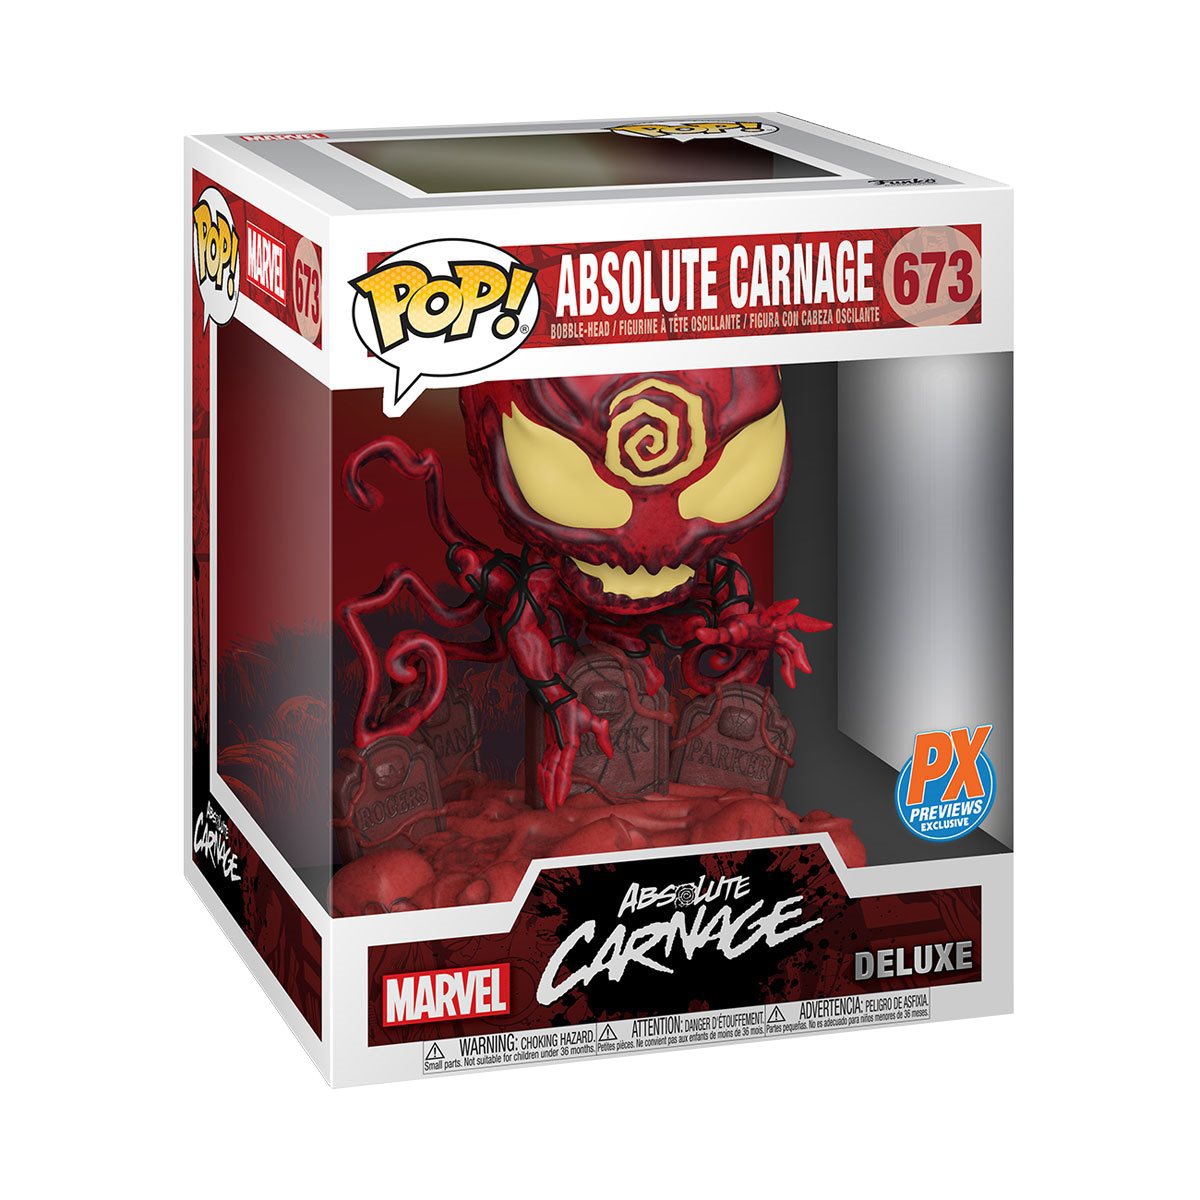 Marvel Heroes Absolute Carnage Deluxe Pop! Figure - Previews Exclusive